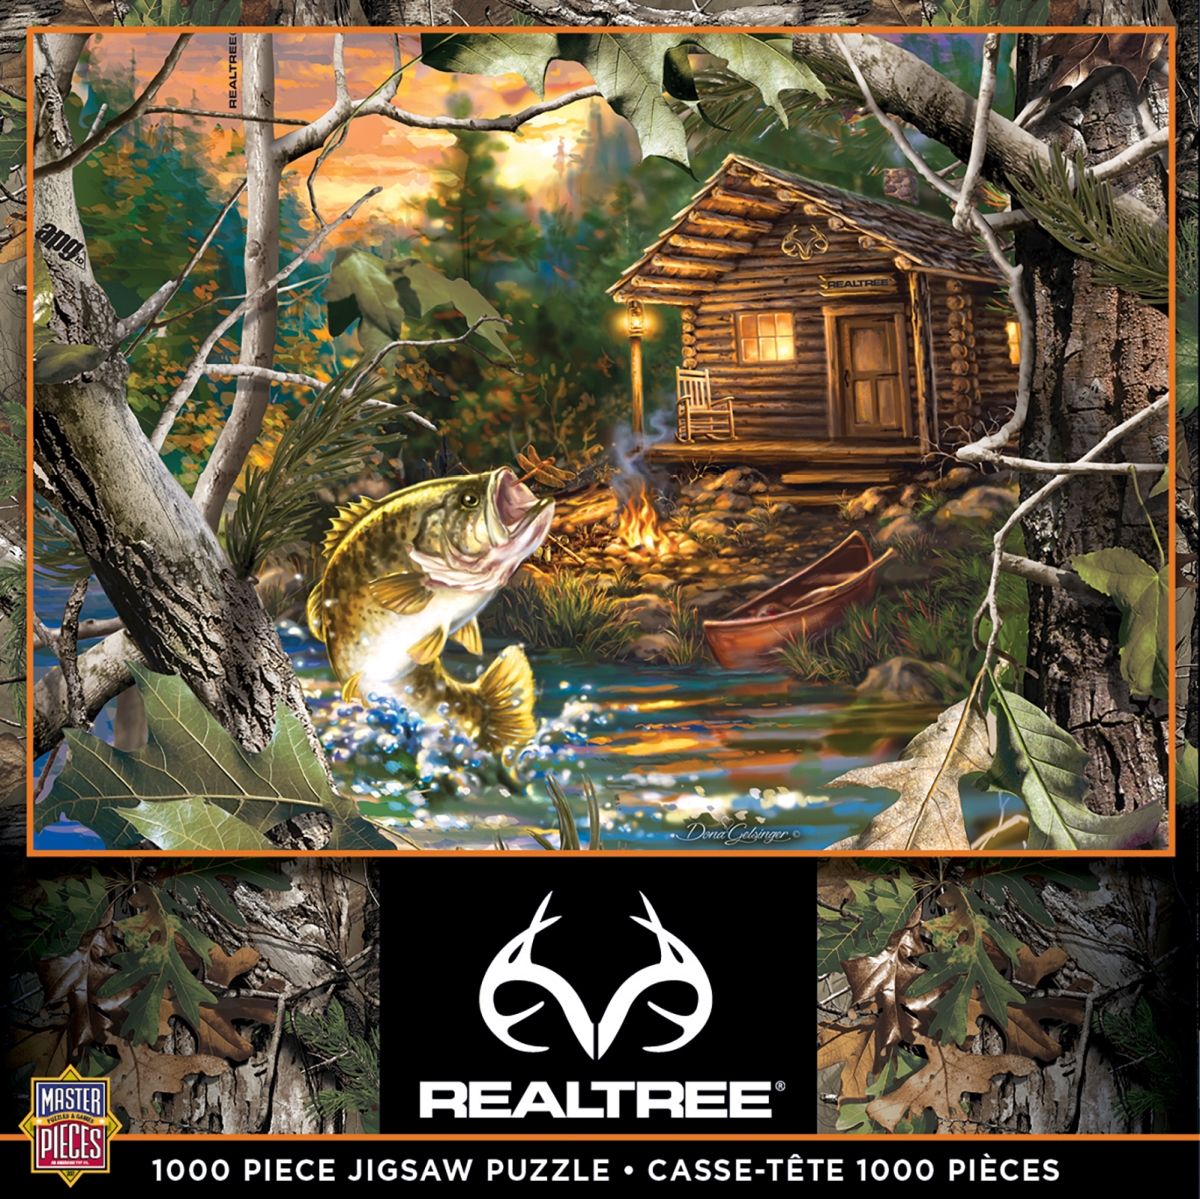 71752 19.25 X 26.75 In. Realtree The One That Got Away Jigsaw Puzzle - 1000 Piece